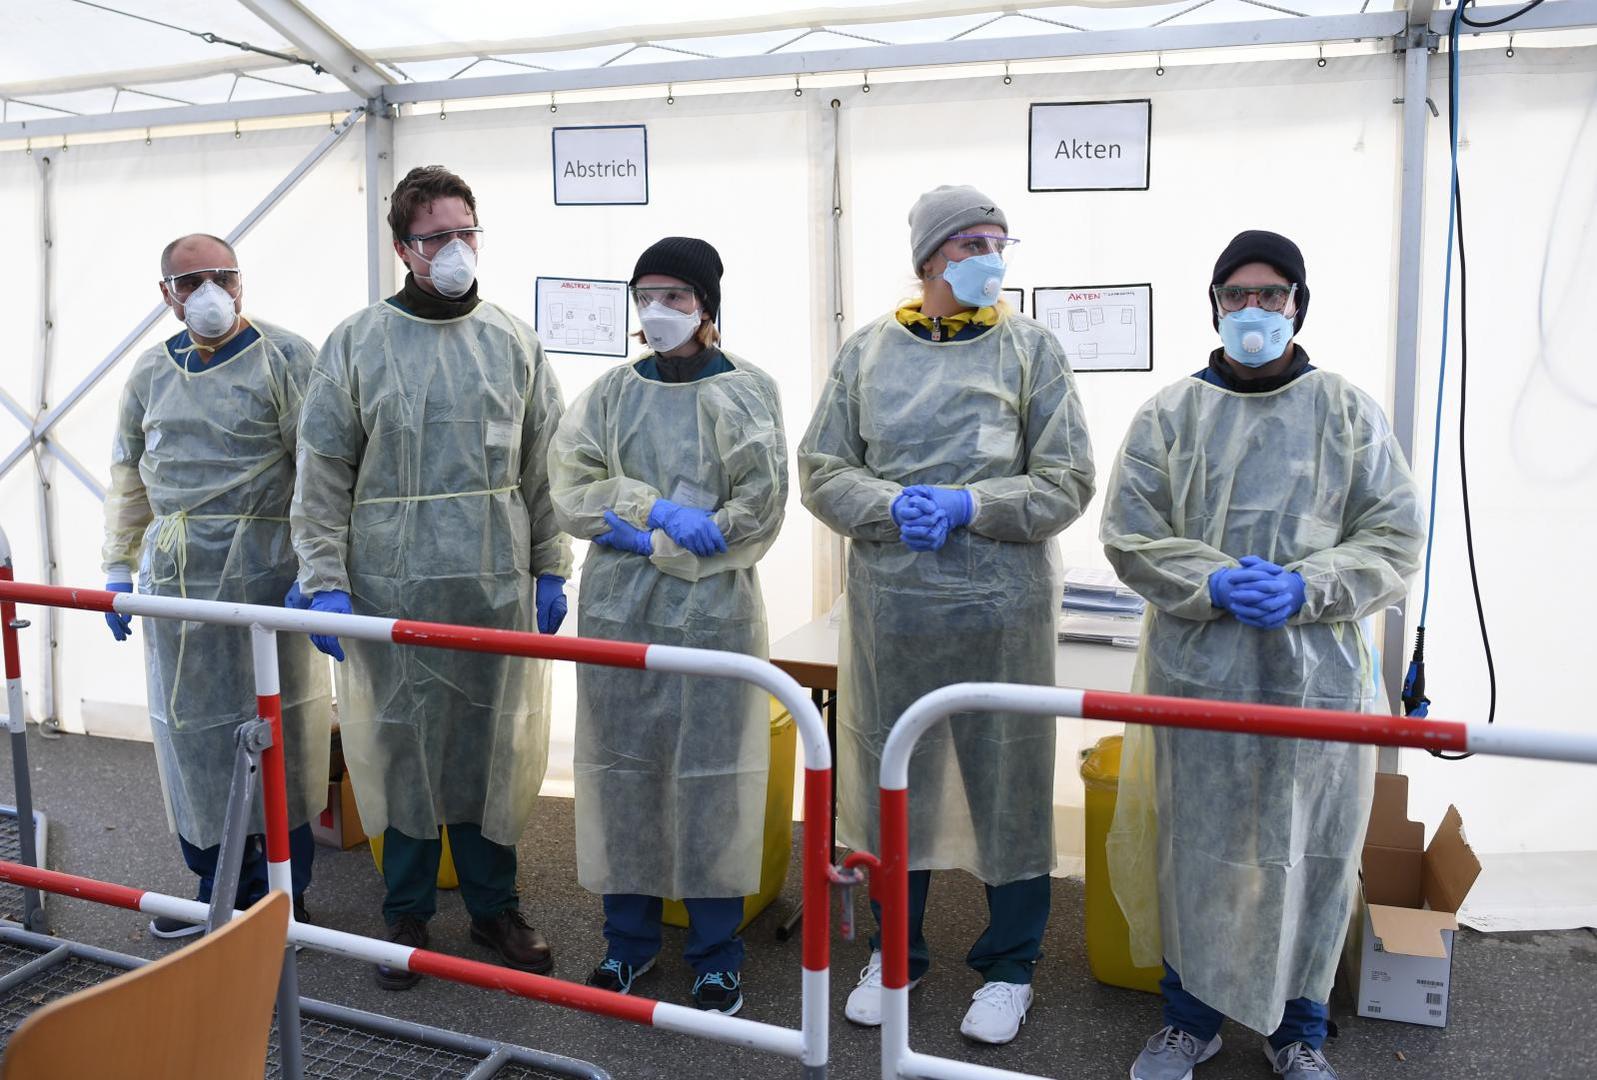 The spread of the coronavirus disease (COVID-19) in Munich Medical employees pose at a special corona test center for public service employees such as police officers, nurses and firefighters during a media presentation as the spread of the coronavirus disease (COVID-19) continues, in Munich, Germany, March 23, 2020. REUTERS/Andreas Gebert ANDREAS GEBERT